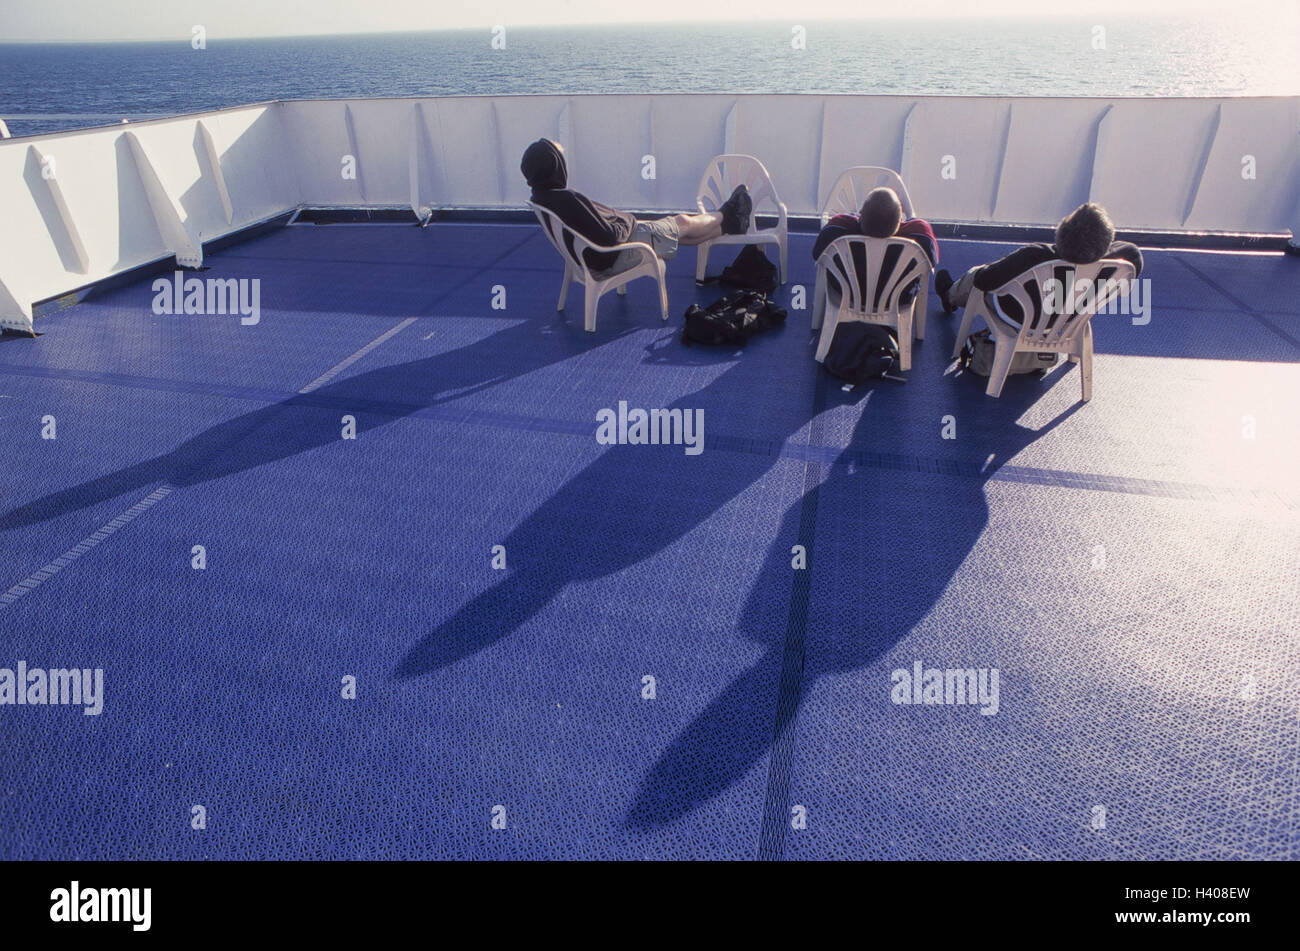 Ferry, solar cap, passengers, the suns, back view, sea, ship, car ferry, navigation, transport, promotion, cruise, deck, chairs, travellers, tourists, recreation, rest, enjoy, take it easy, leisure time, vacation Stock Photo